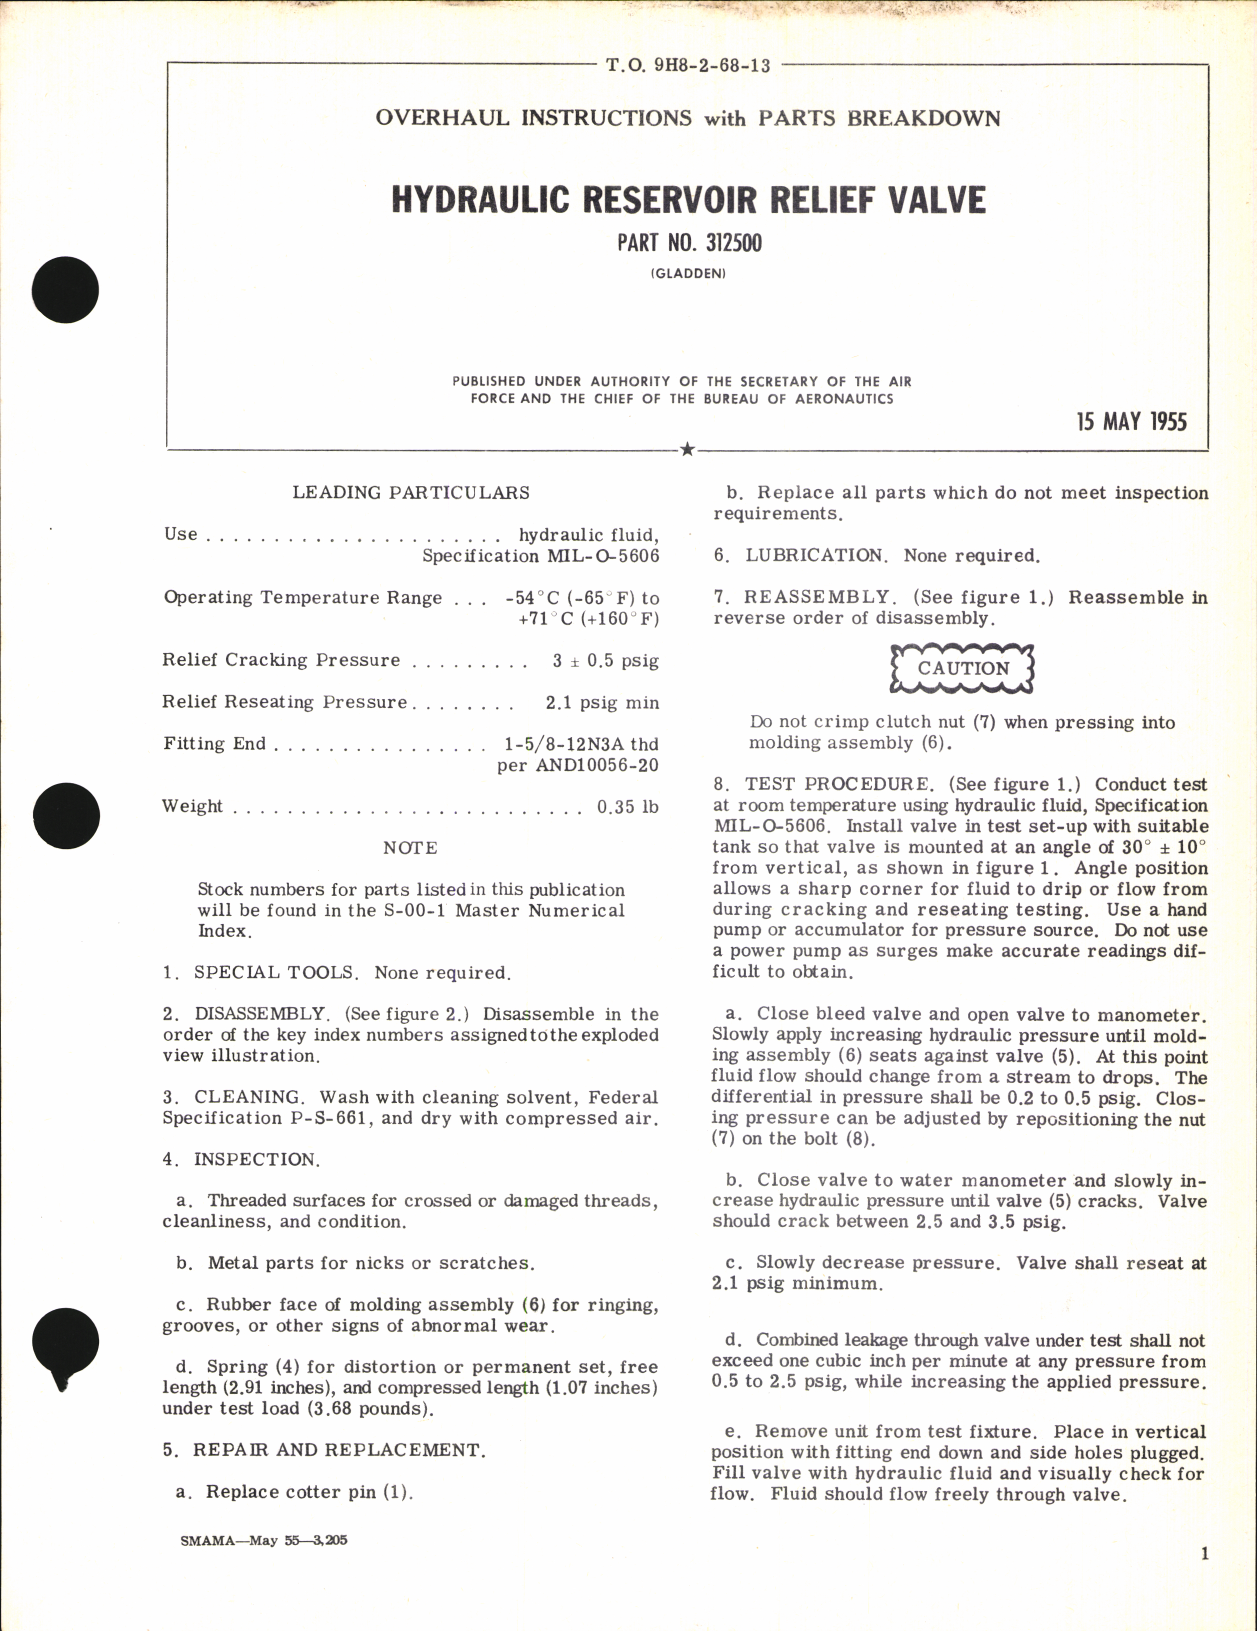 Sample page 1 from AirCorps Library document: Overhaul Instructions with Parts Breakdown for Hydraulic Reservoir Relief Valve Part no. 312500